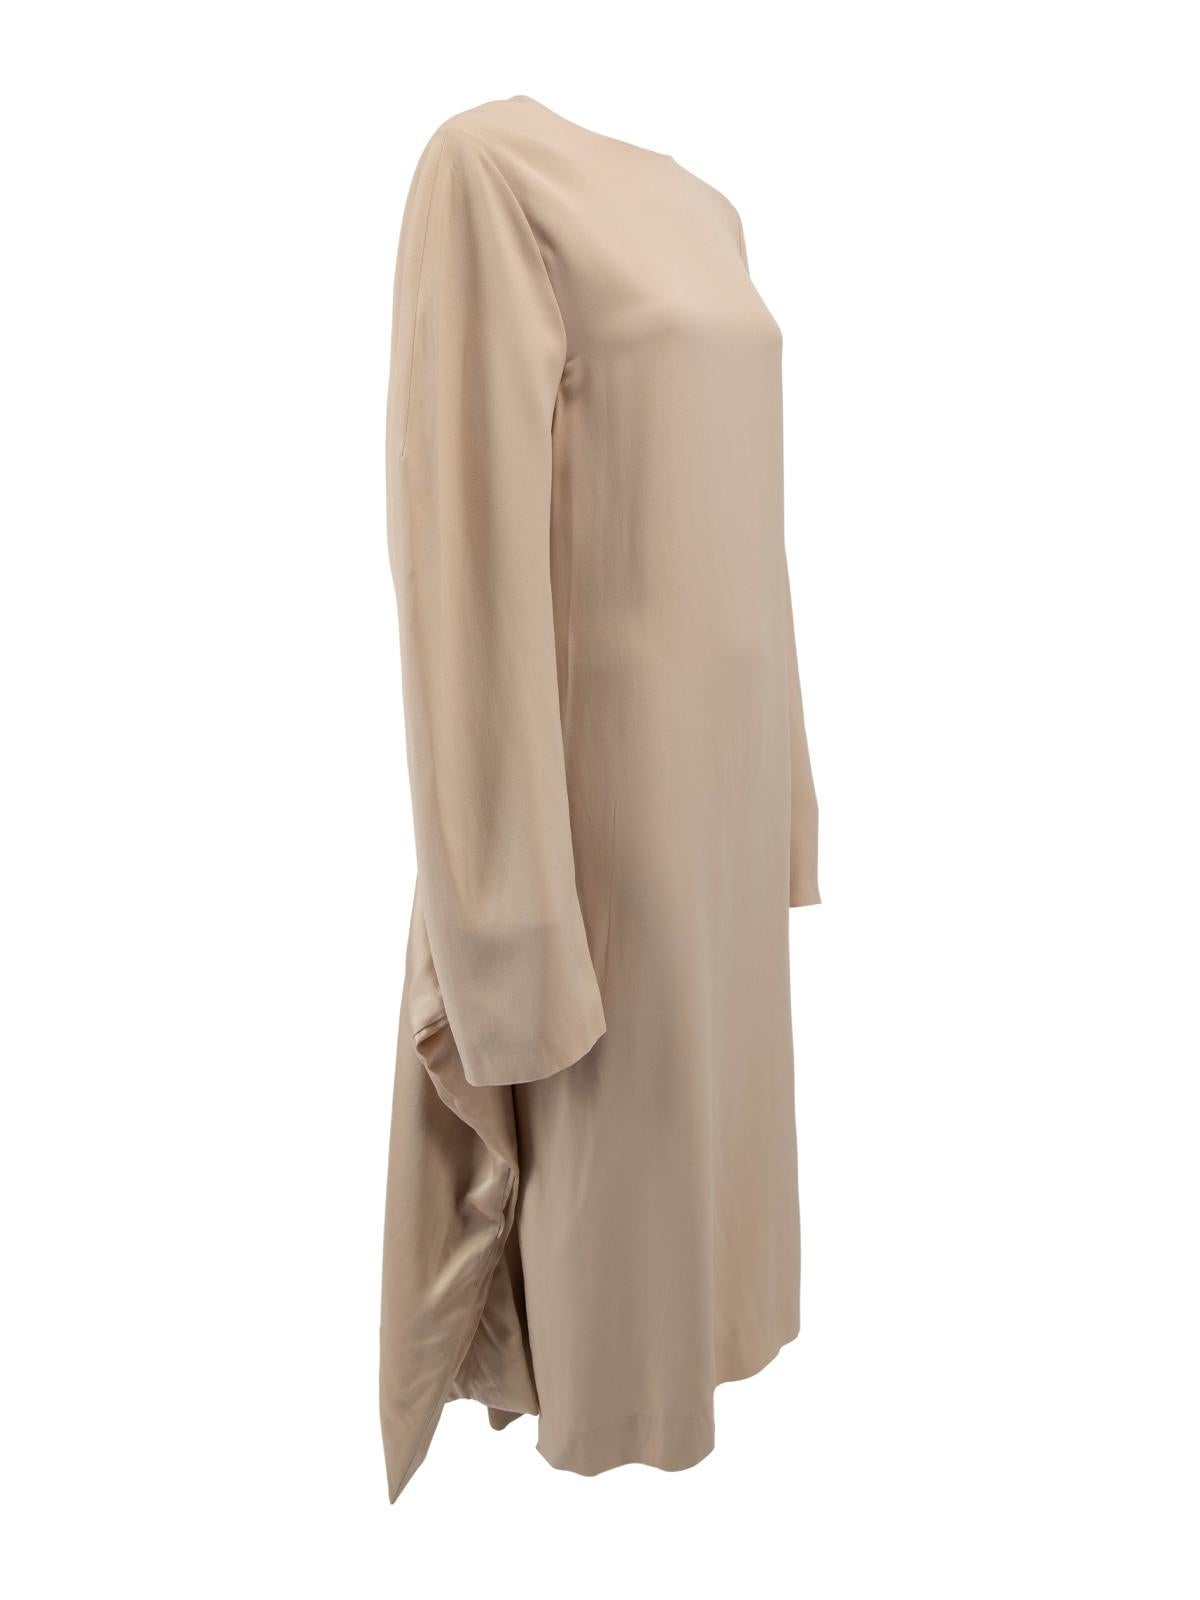 CONDITION is Never worn with tags. No visable wear to dress is evident on this Jil Sander designer reesale item. Details Nude/Pastel pink Silk Maxi dress Oversized Long wide sleeves Round neckline Shoulder zip fastening Padded belt tie on waistline